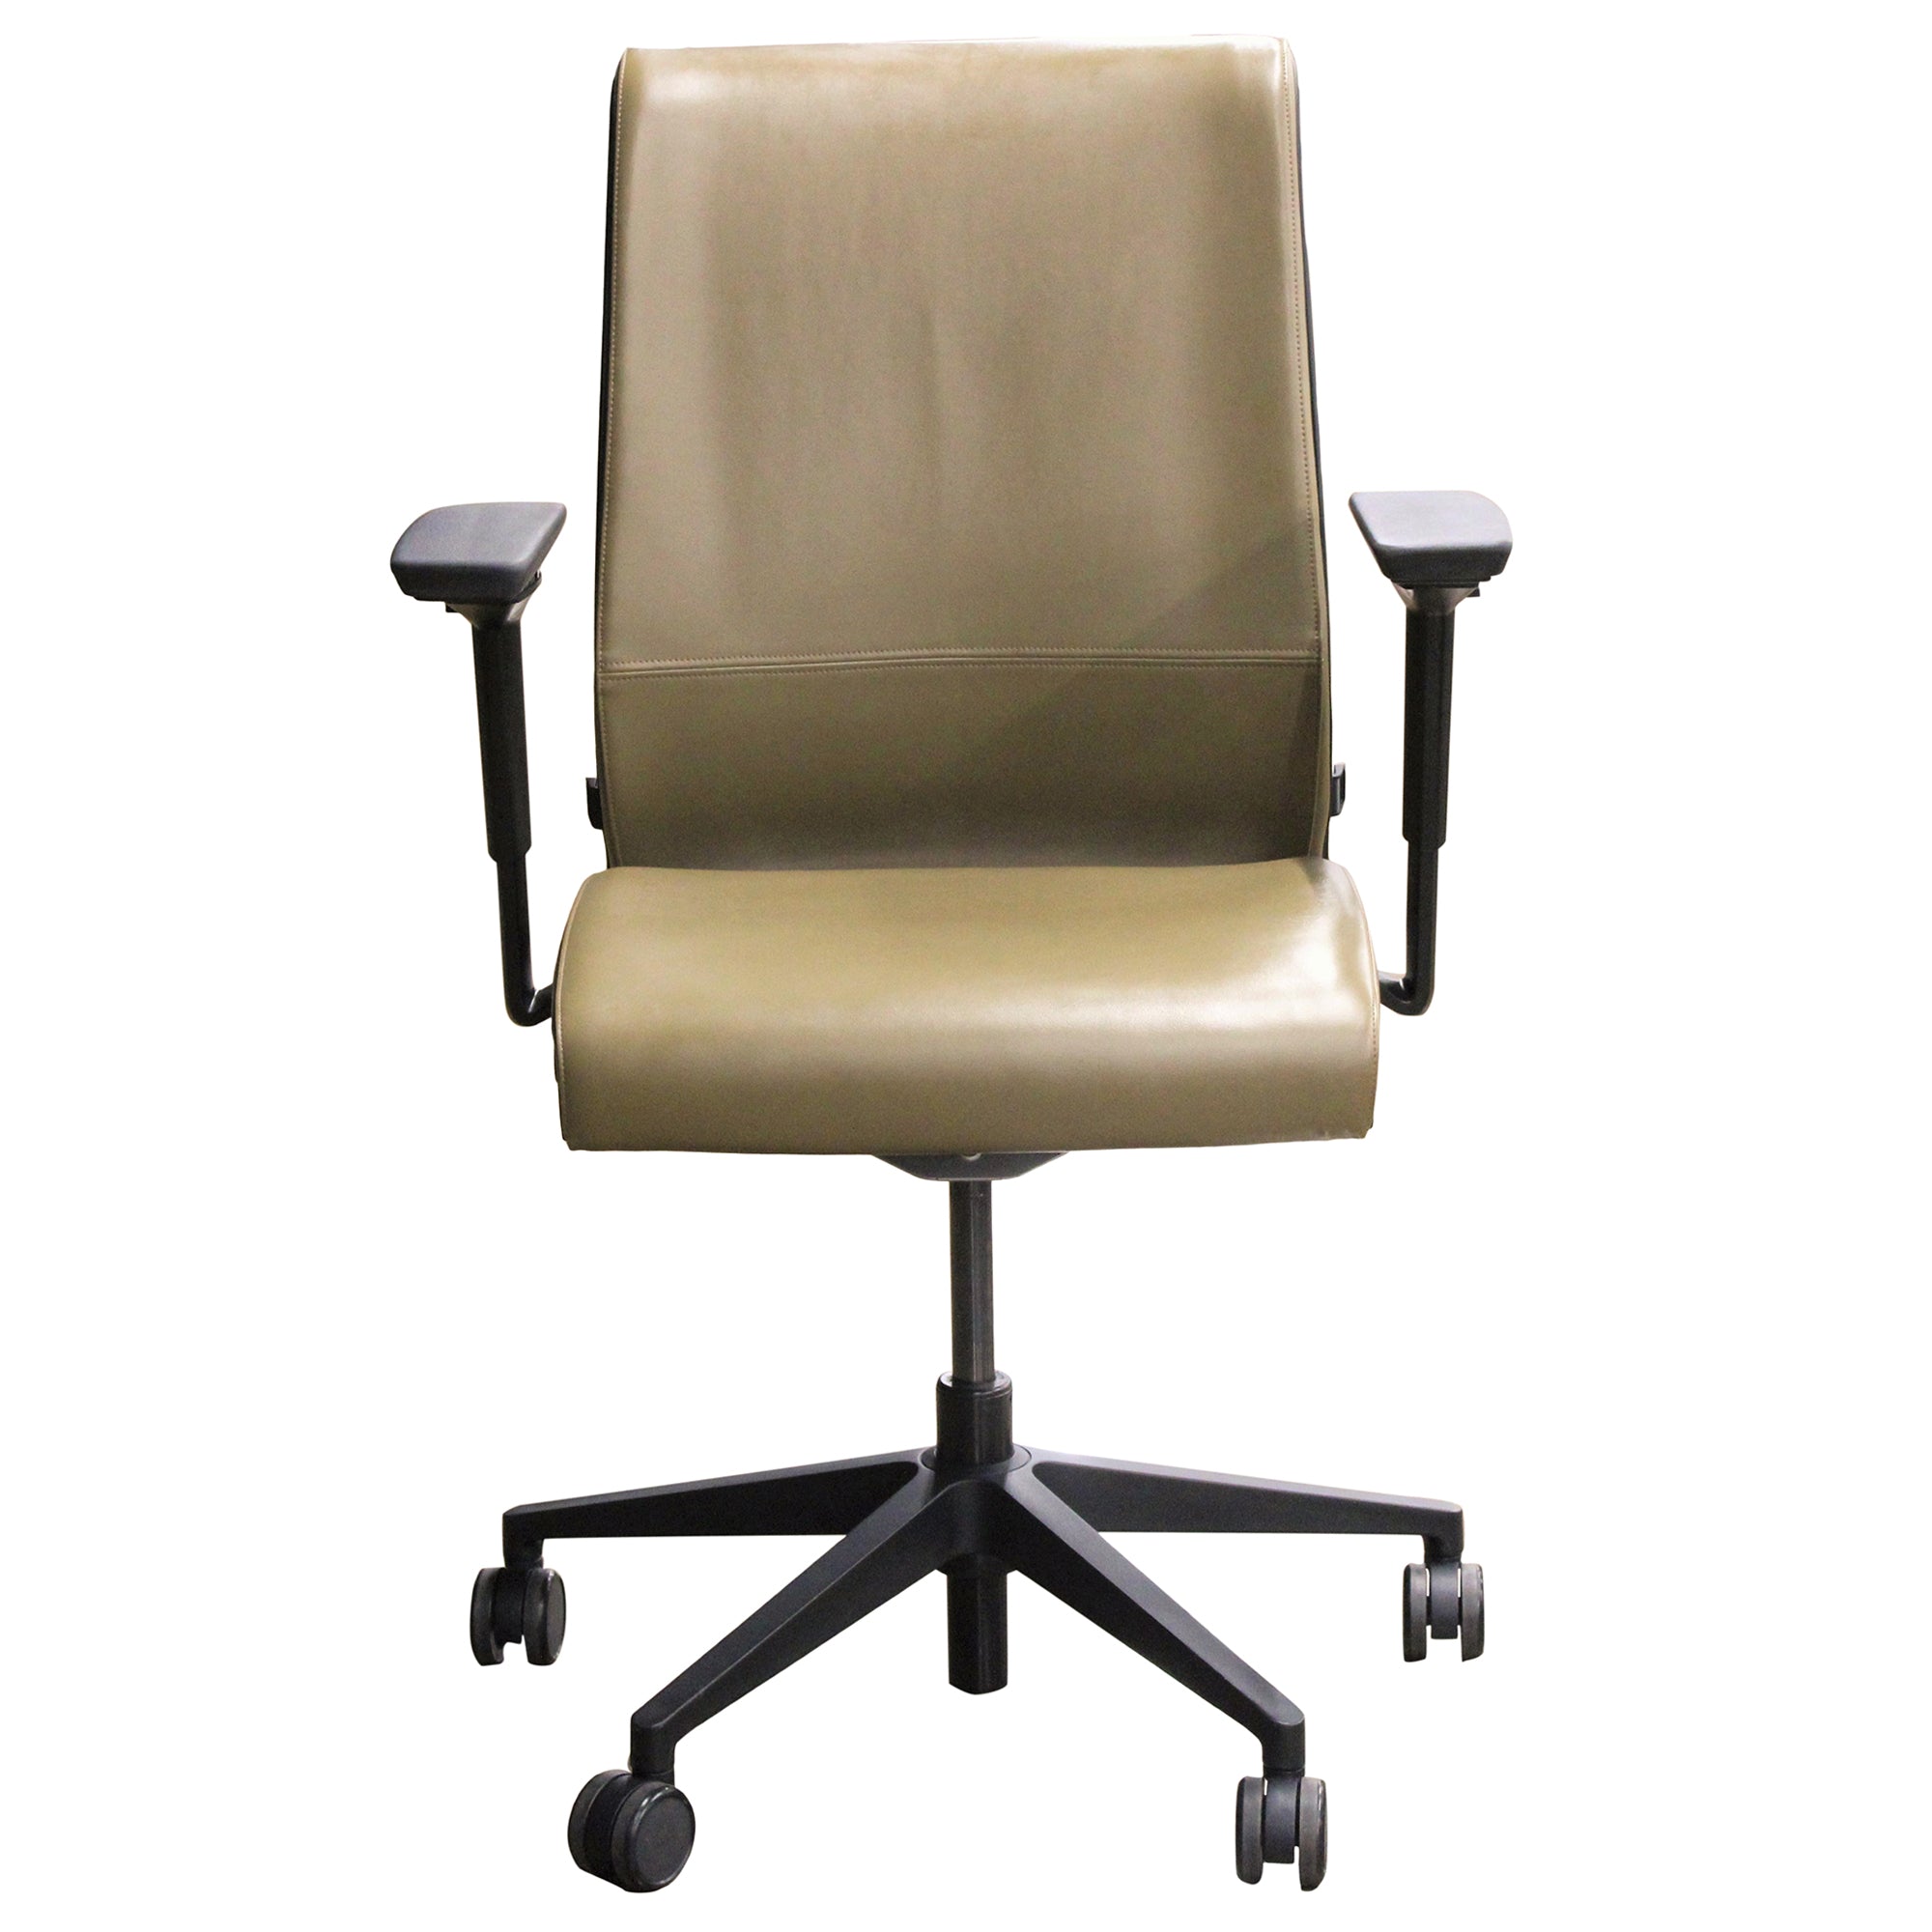 Steelcase Think V1 Task Chair, Olive - Preowned